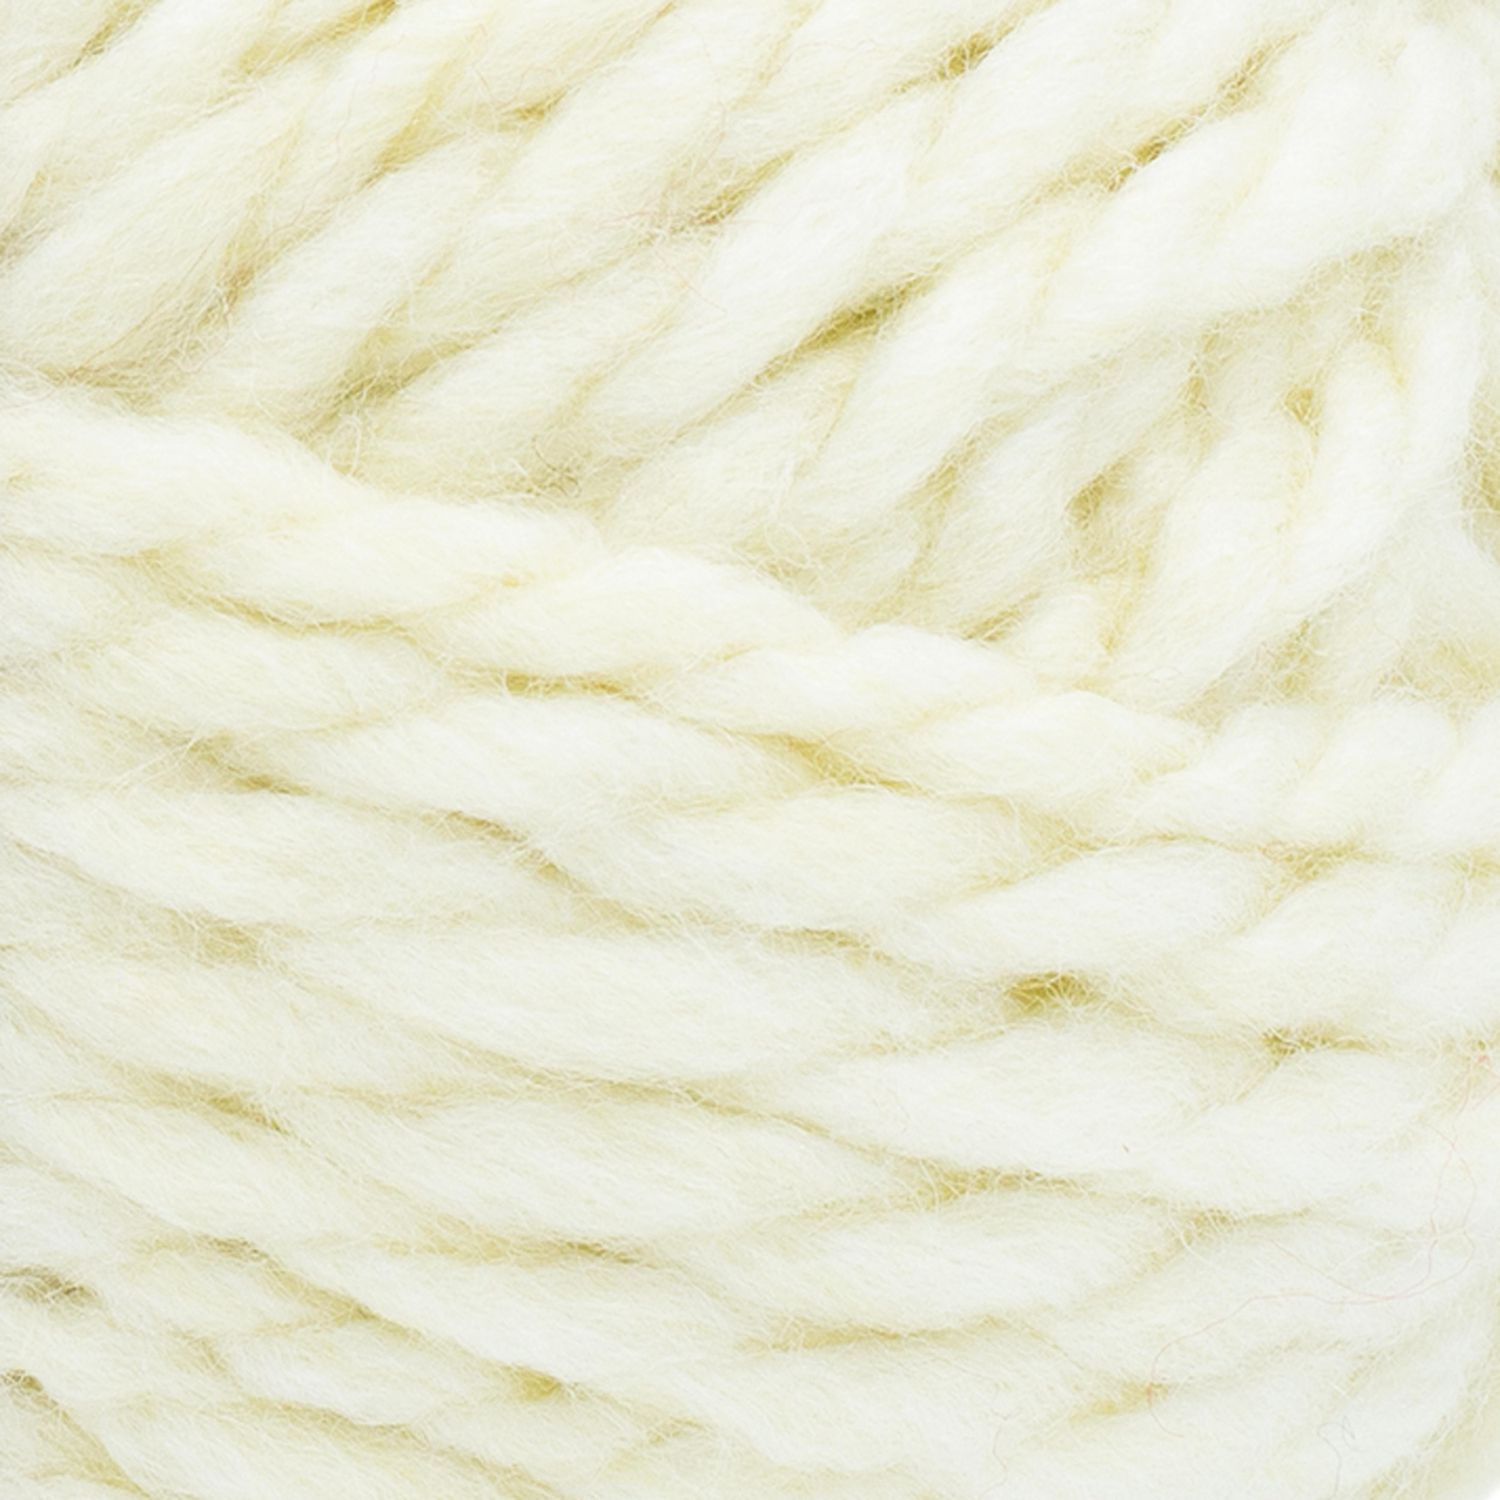 Lion Brand Wool-Ease Thick & Quick Yarn Seaglass